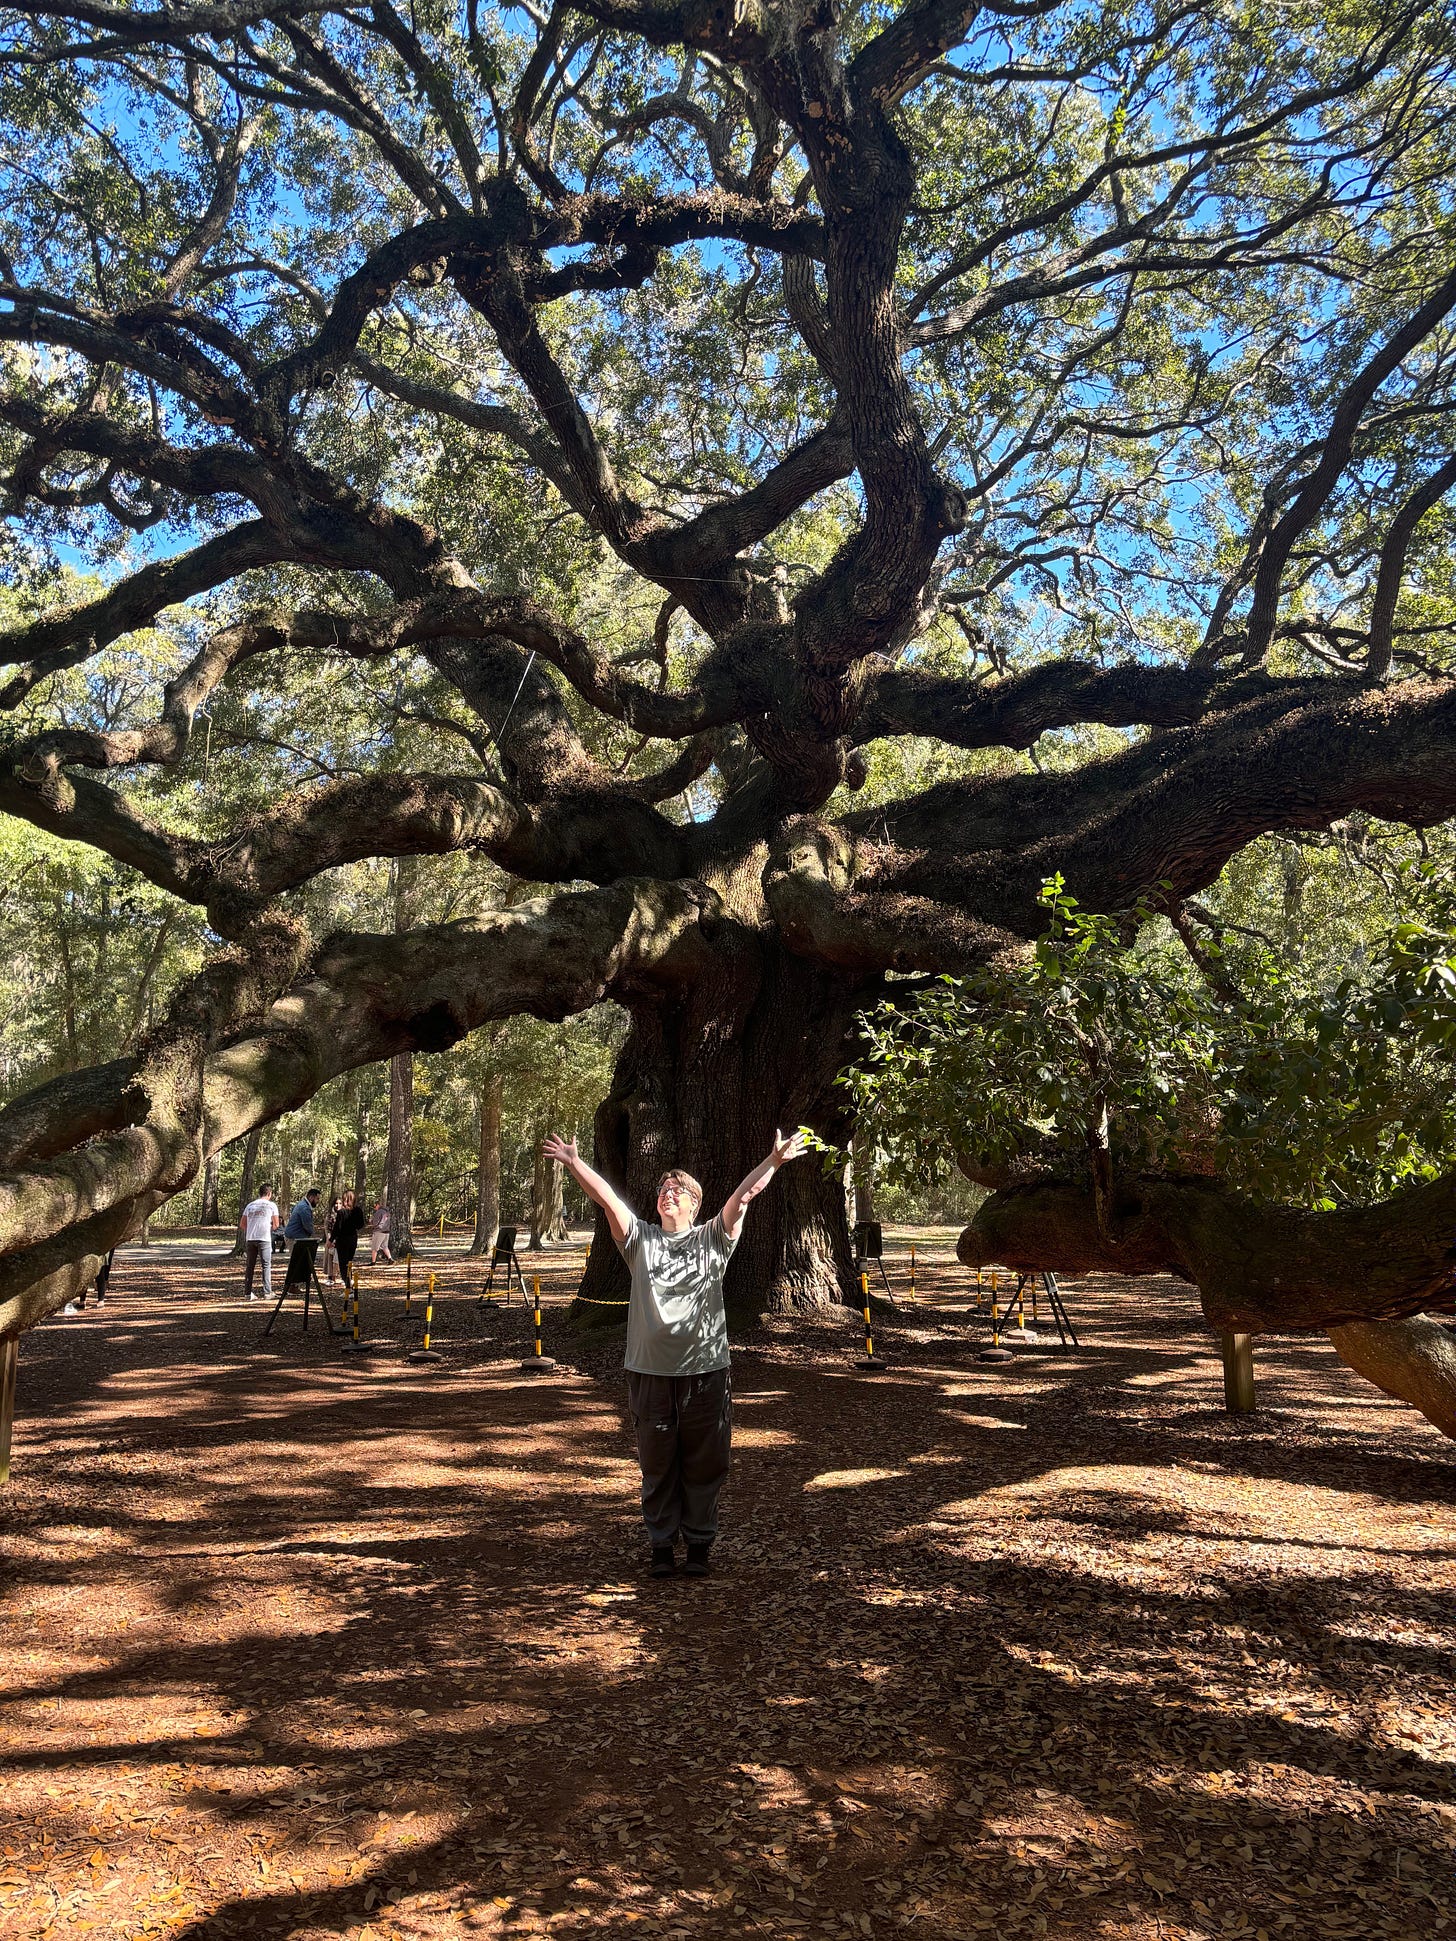 Fantastically large live oak with massive branches. I stand in the foreground in a pale green shirt with pale hands raised and a joyful upraised face.